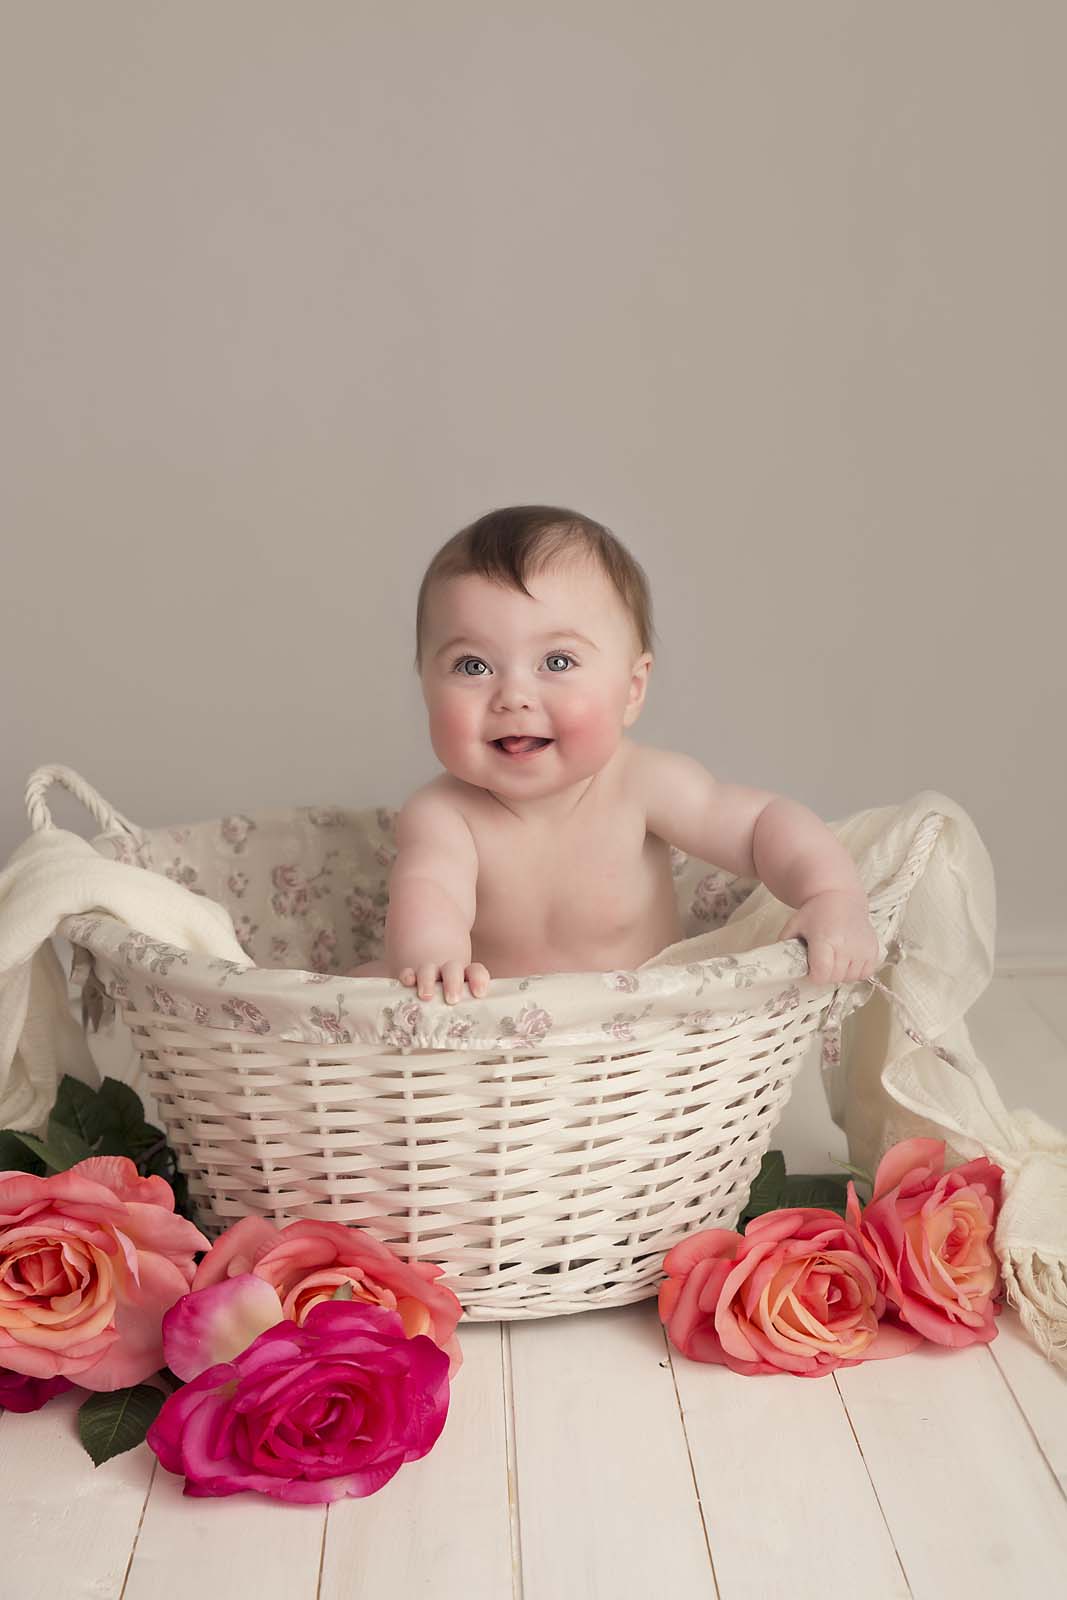 baby girl is sitting in a whit basket with pink roses photographed by baby photogrepher Manchester